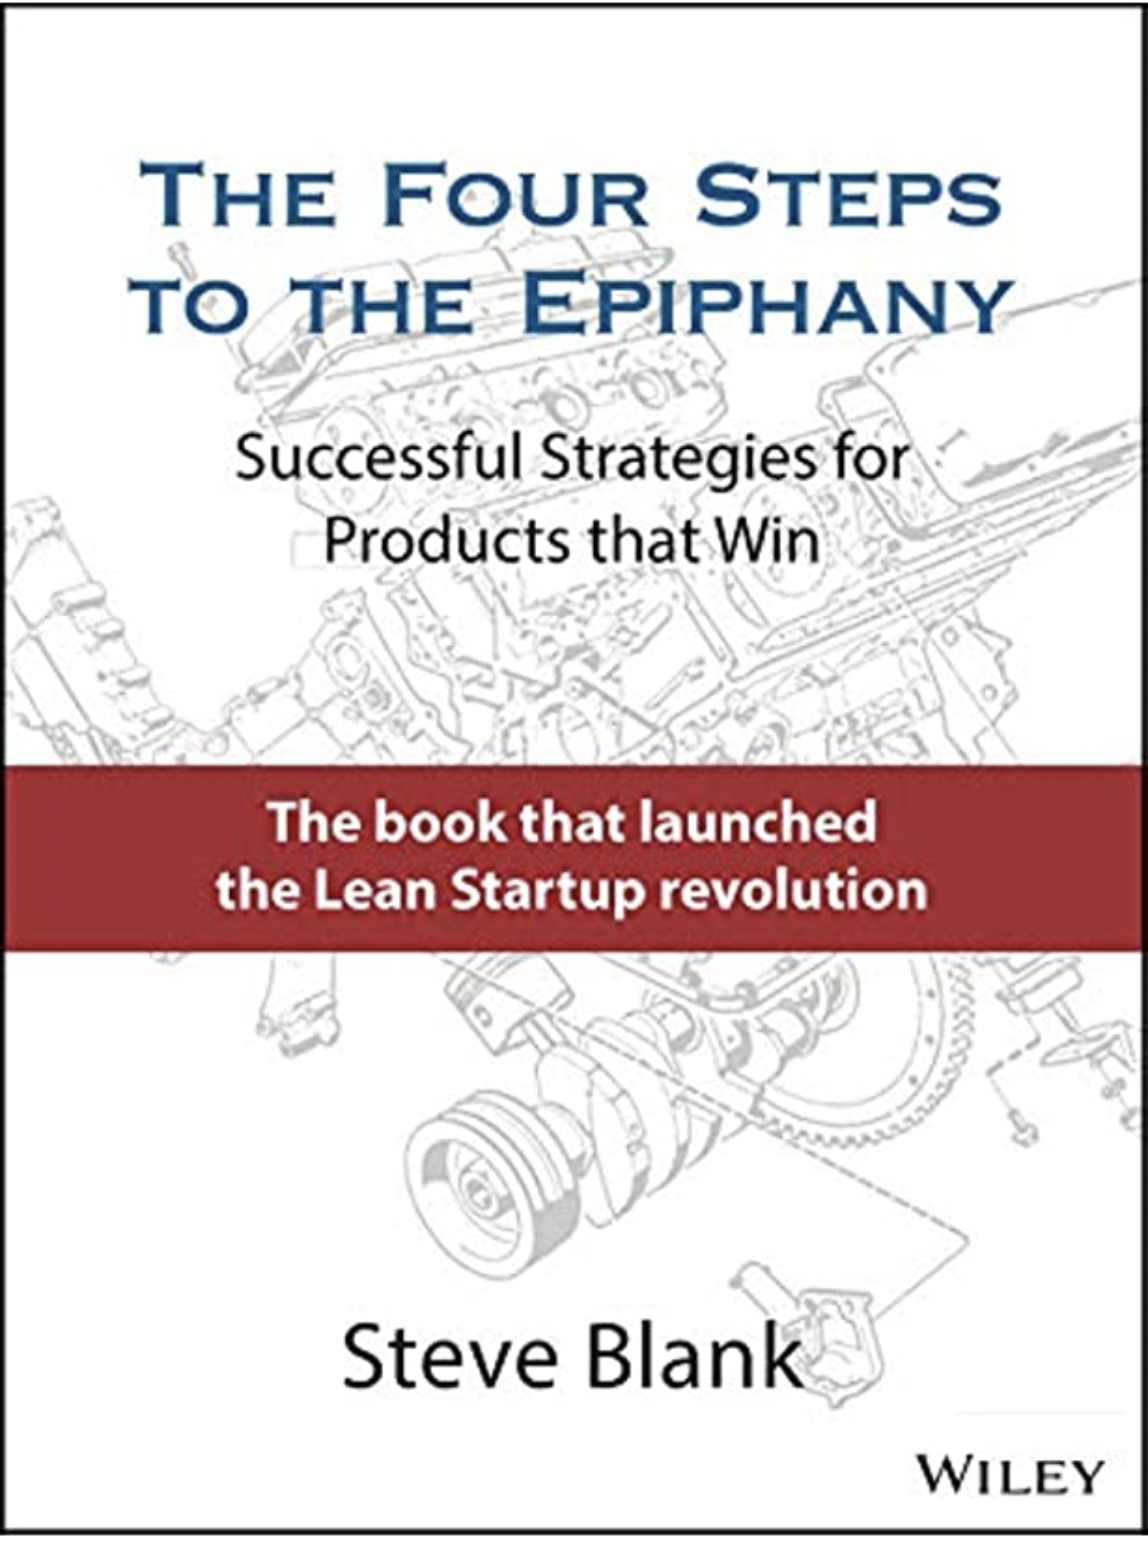 The Four Steps to the Epiphany: Successful Strategies or Products that Win by Steve Blank